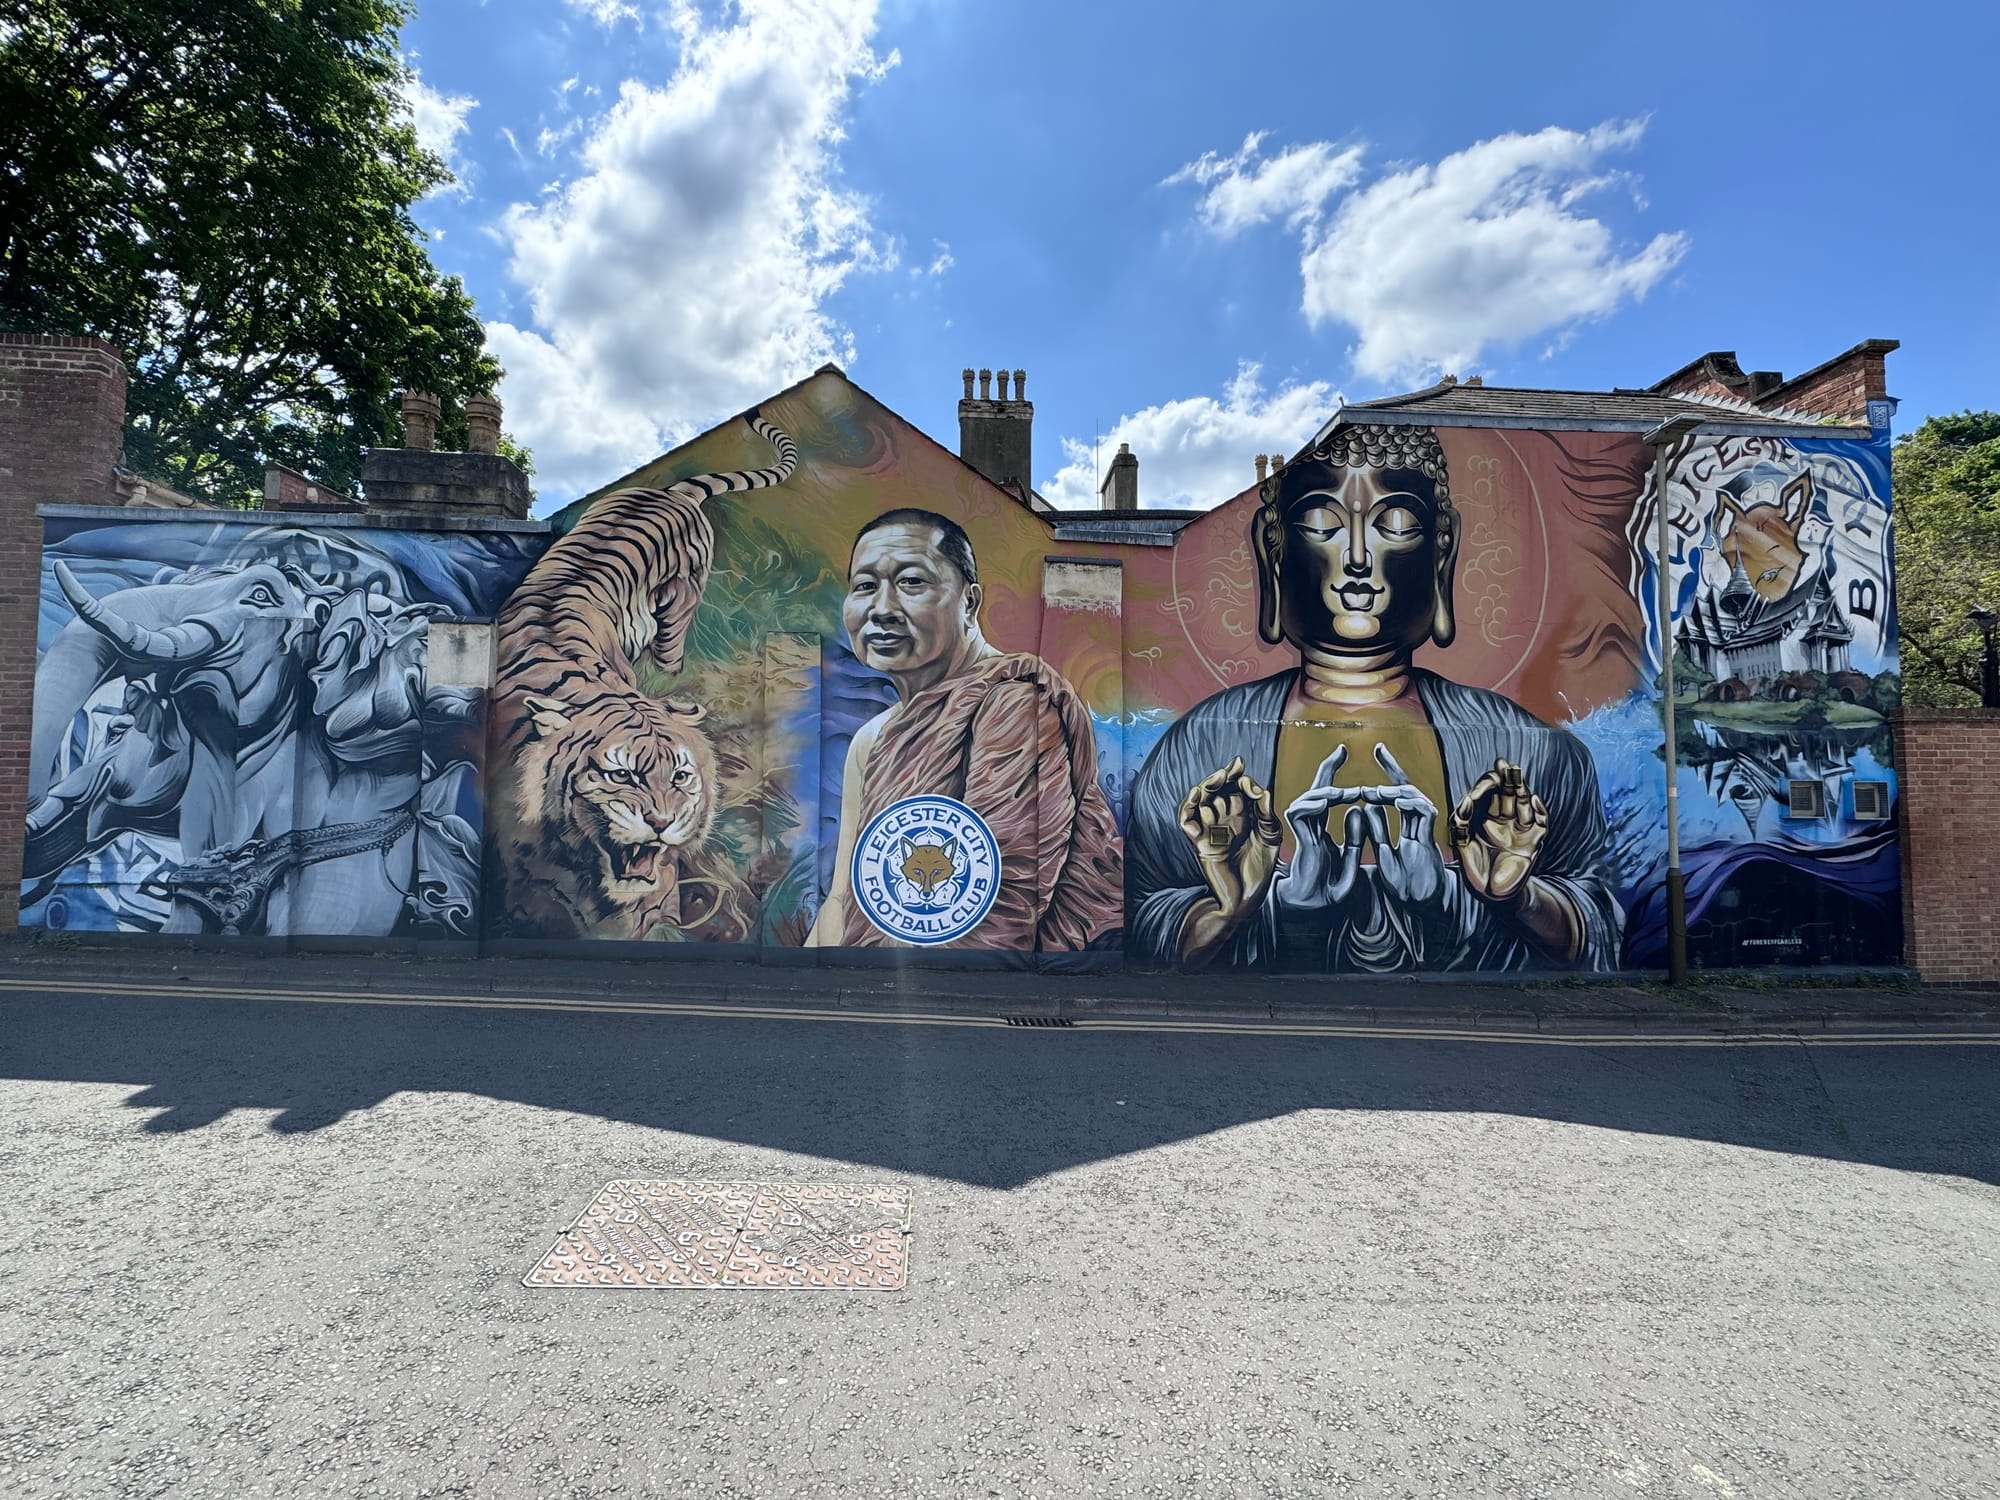 Mural celebrating Leicester City Football Club.